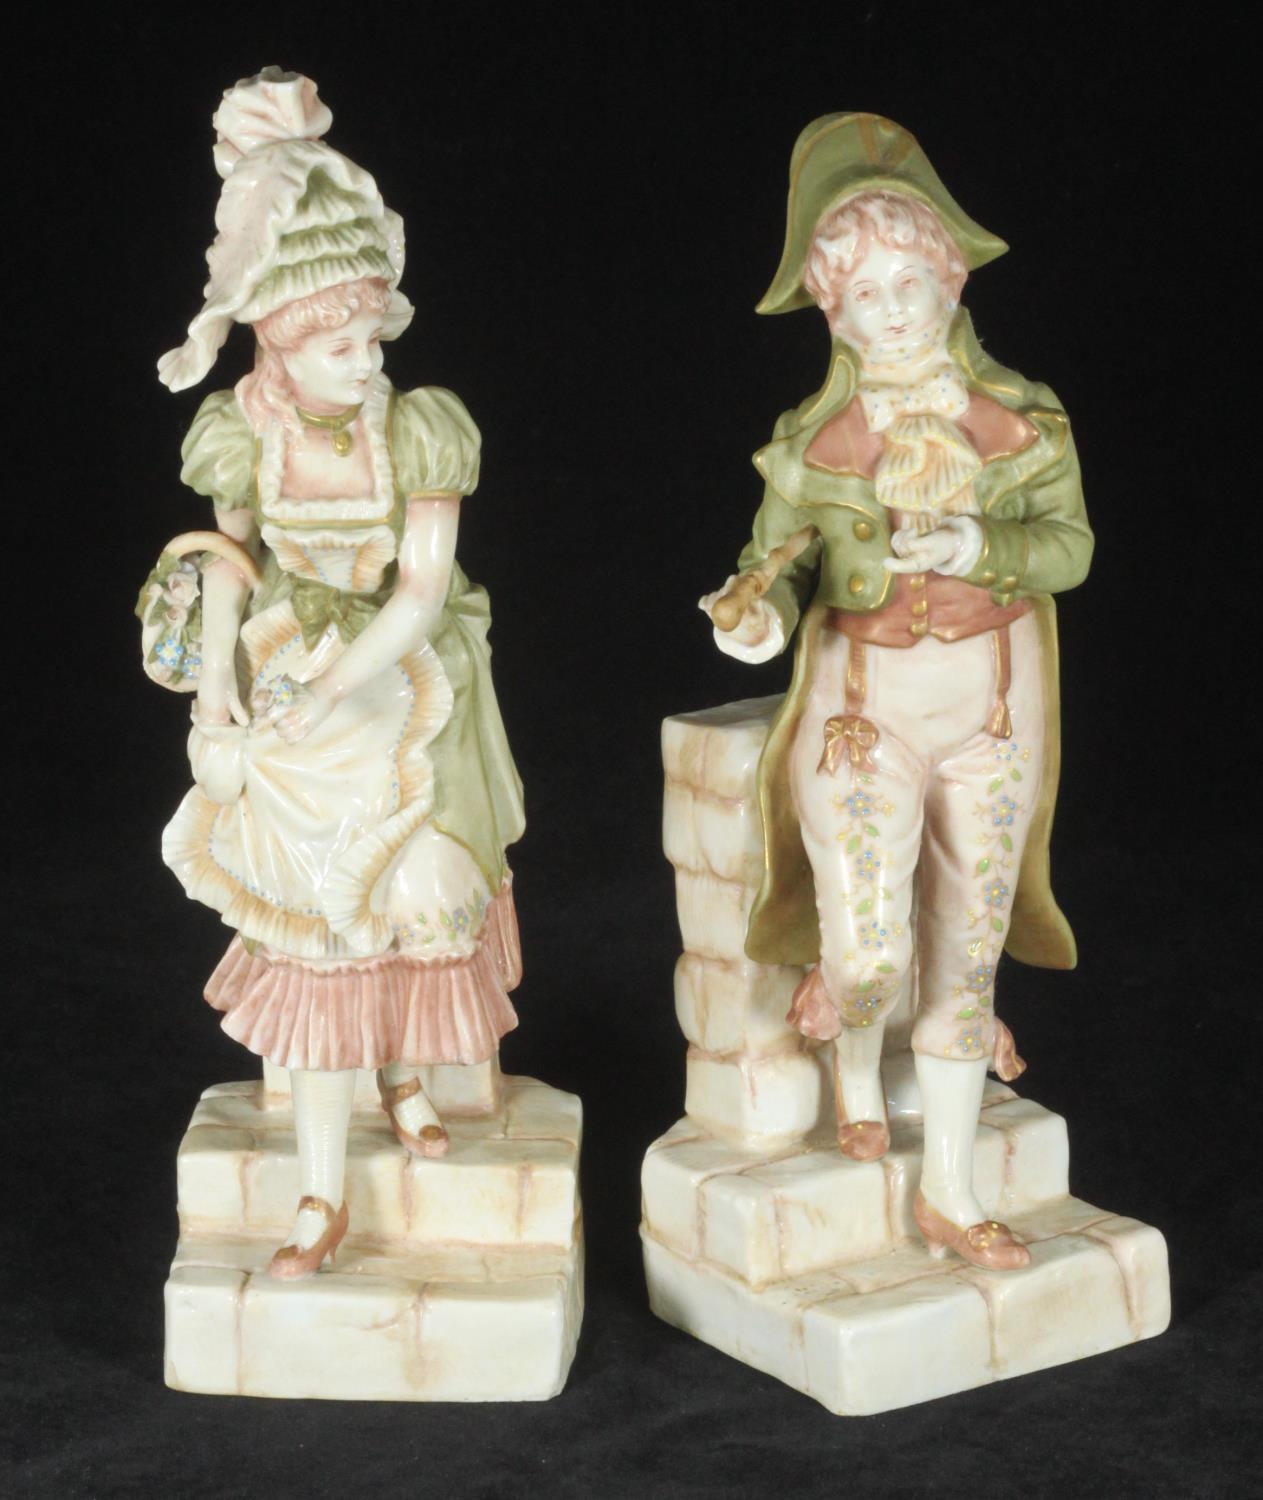 A pair of Ernst Bohne and Sohne porcelain figures of a finely dressed gentleman, and a lady